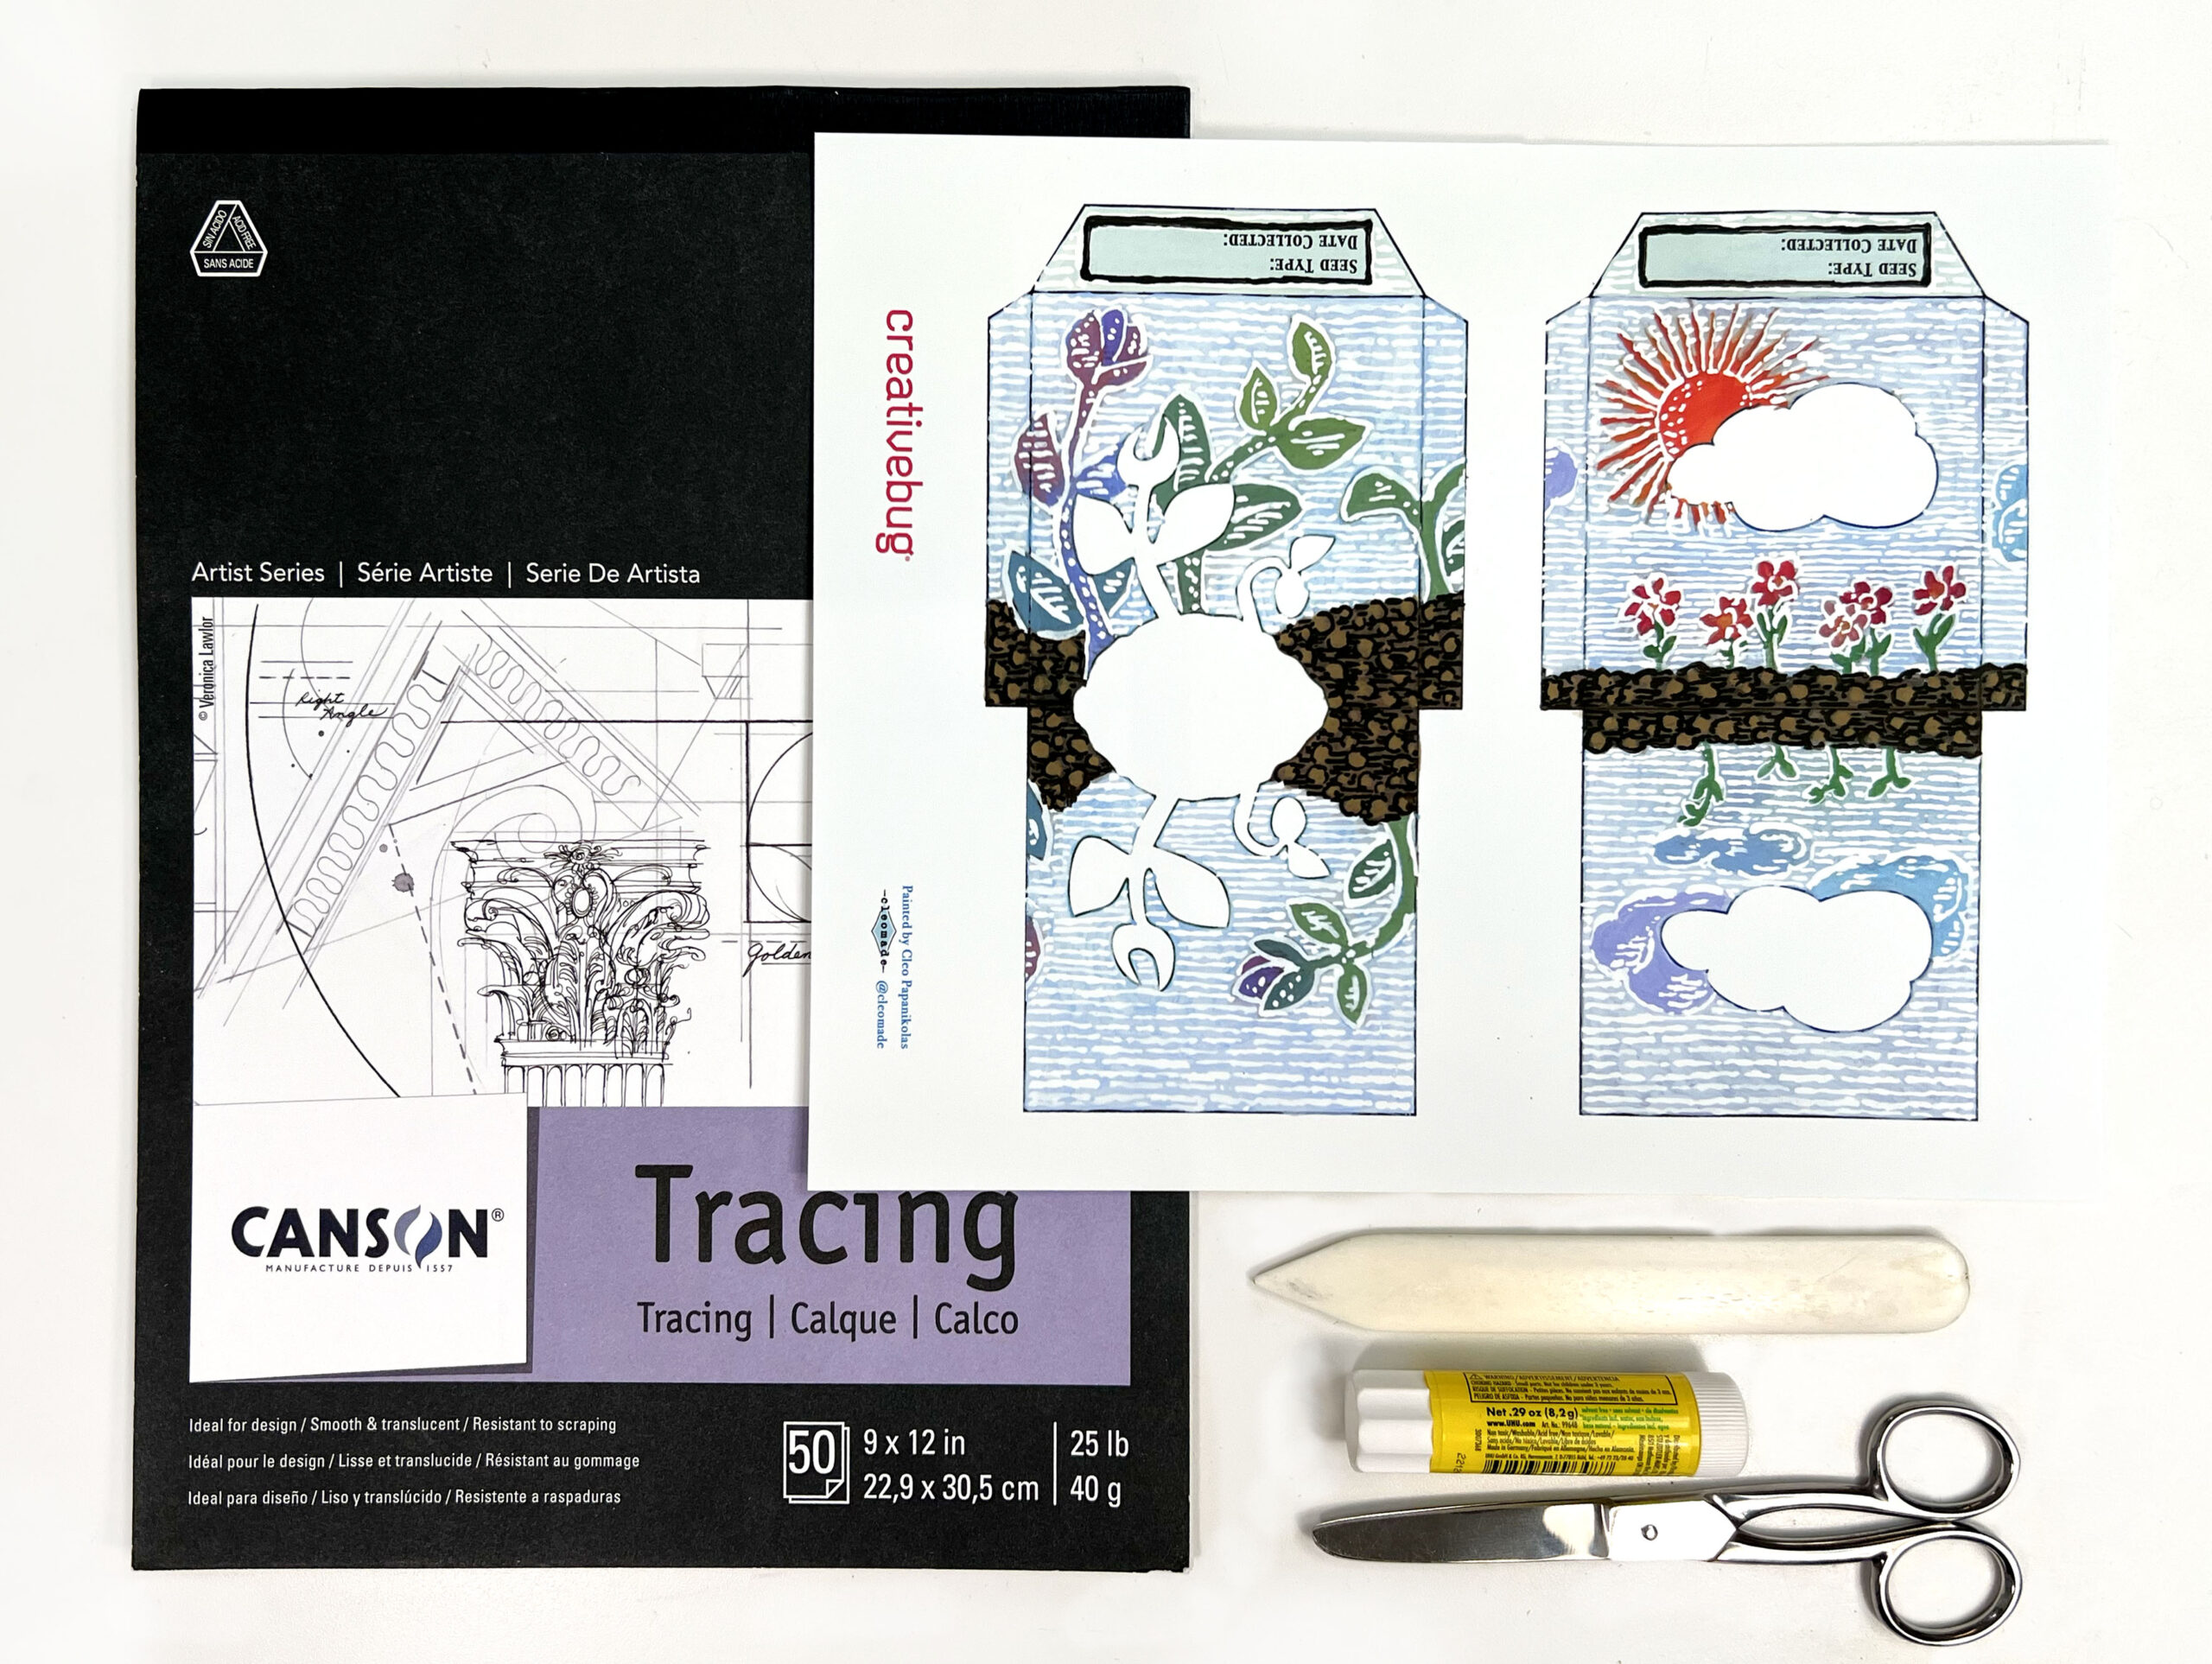 image of materials needed to make handmade paper seed packets including a paper template, scissors, bone folder, glue stick, and tracing paper